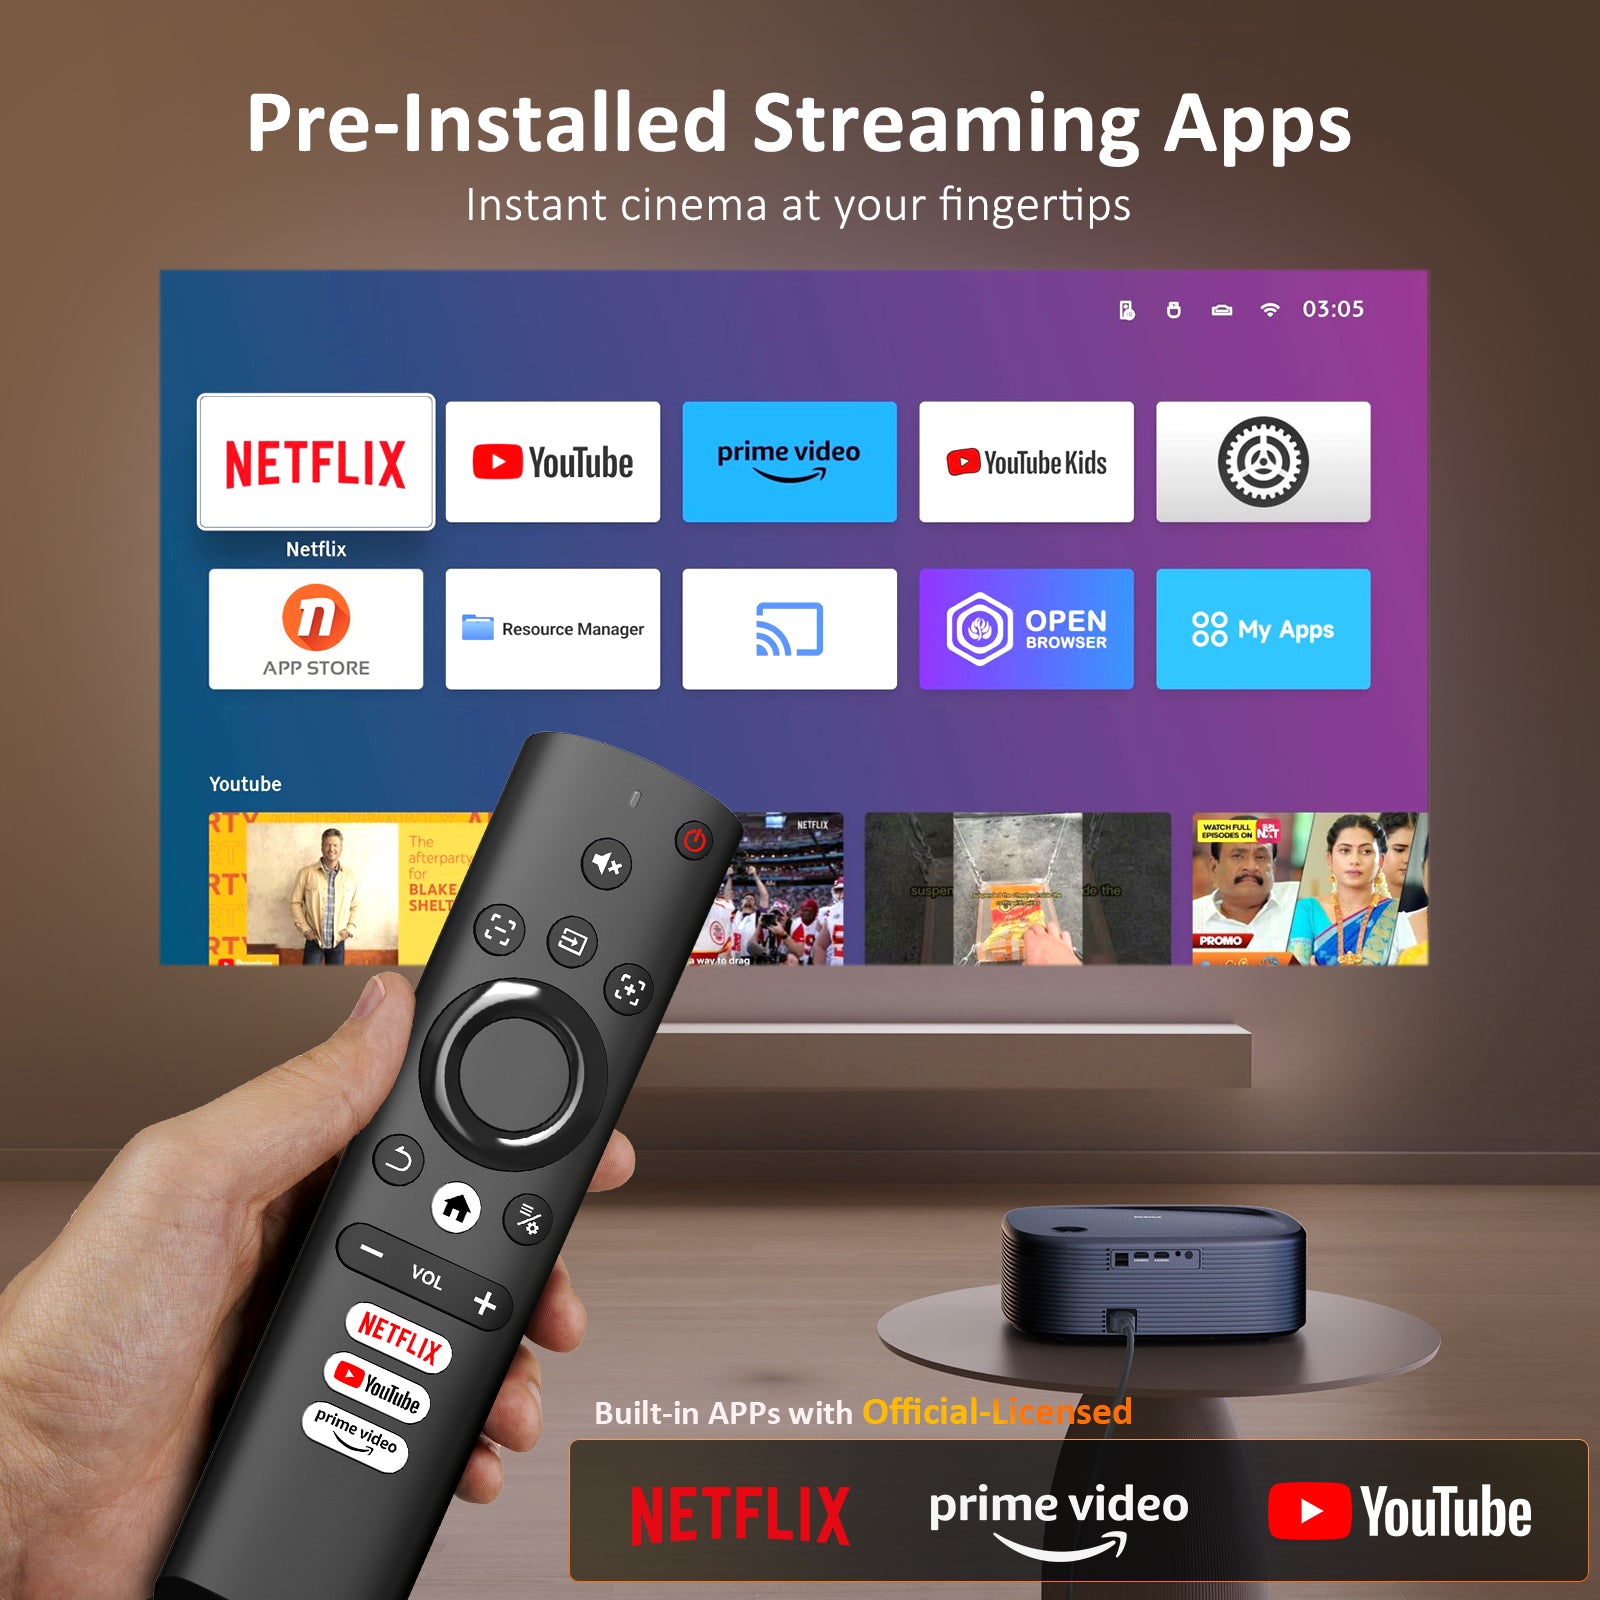 Built-in Netflix, YouTube and Prime Video app, you can easily watch movies with the remote control.